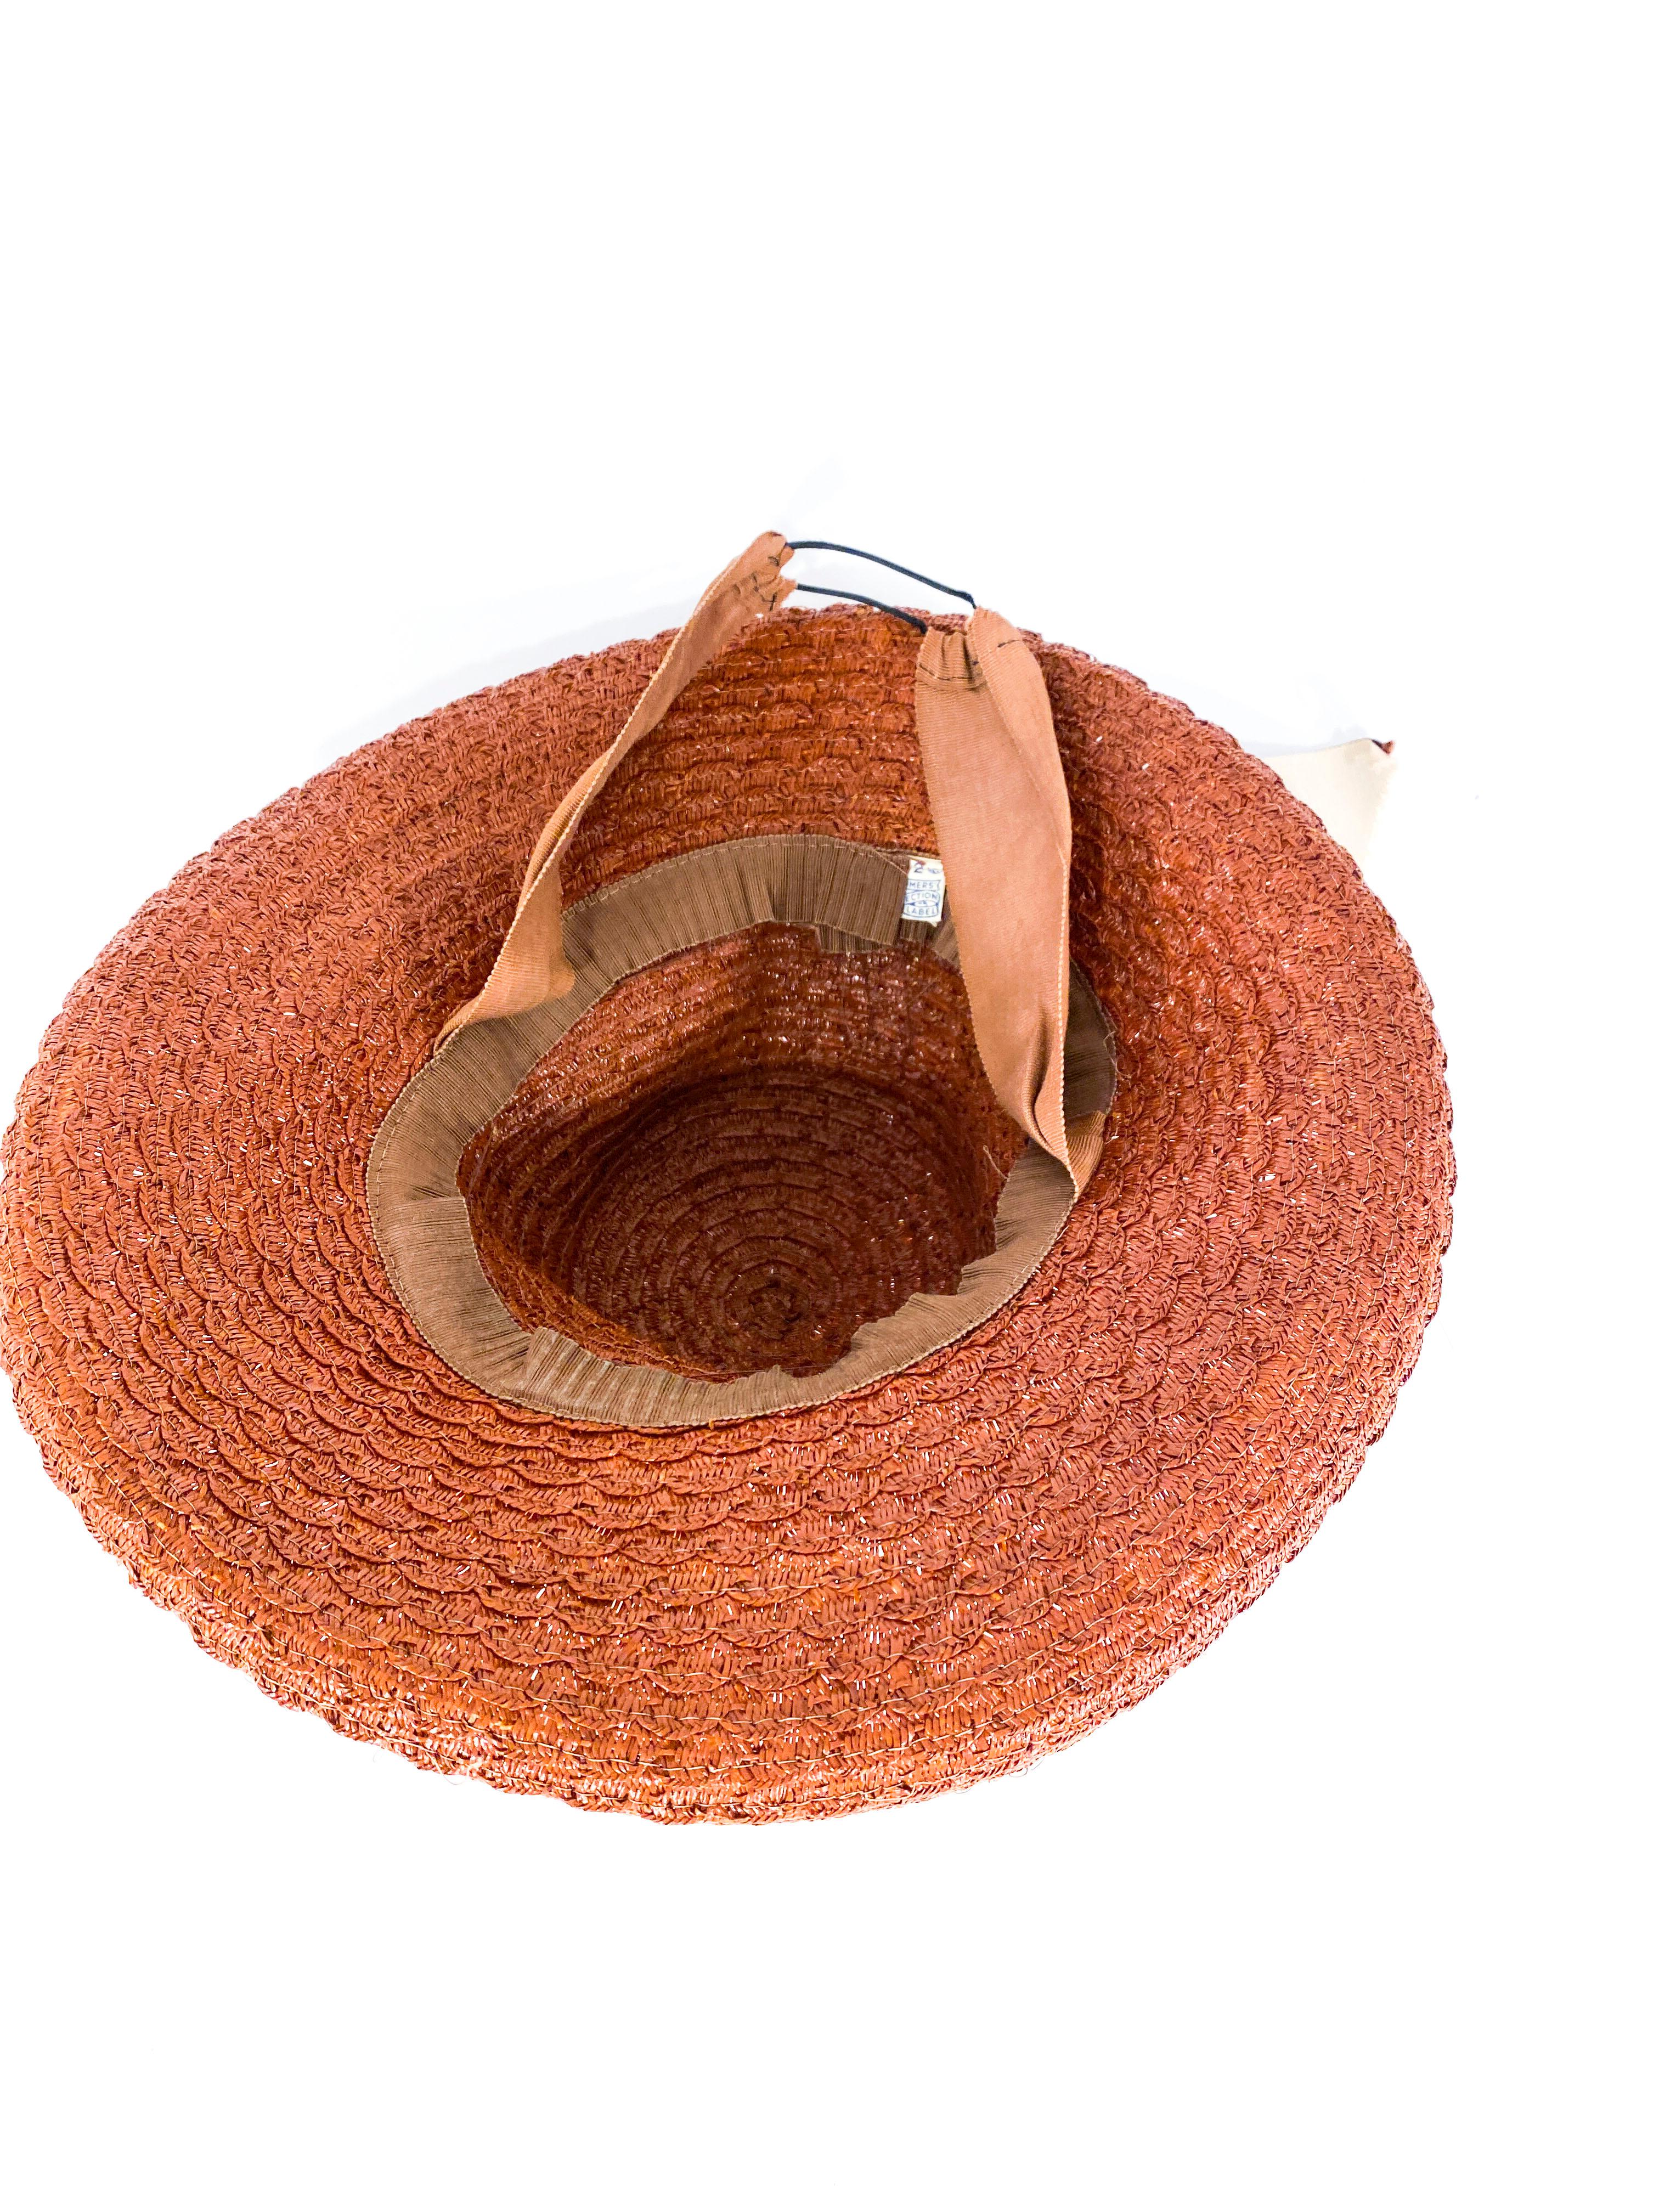 1930s Rust Woven Coated Straw with Ribbon and Flower Accents In Good Condition For Sale In San Francisco, CA